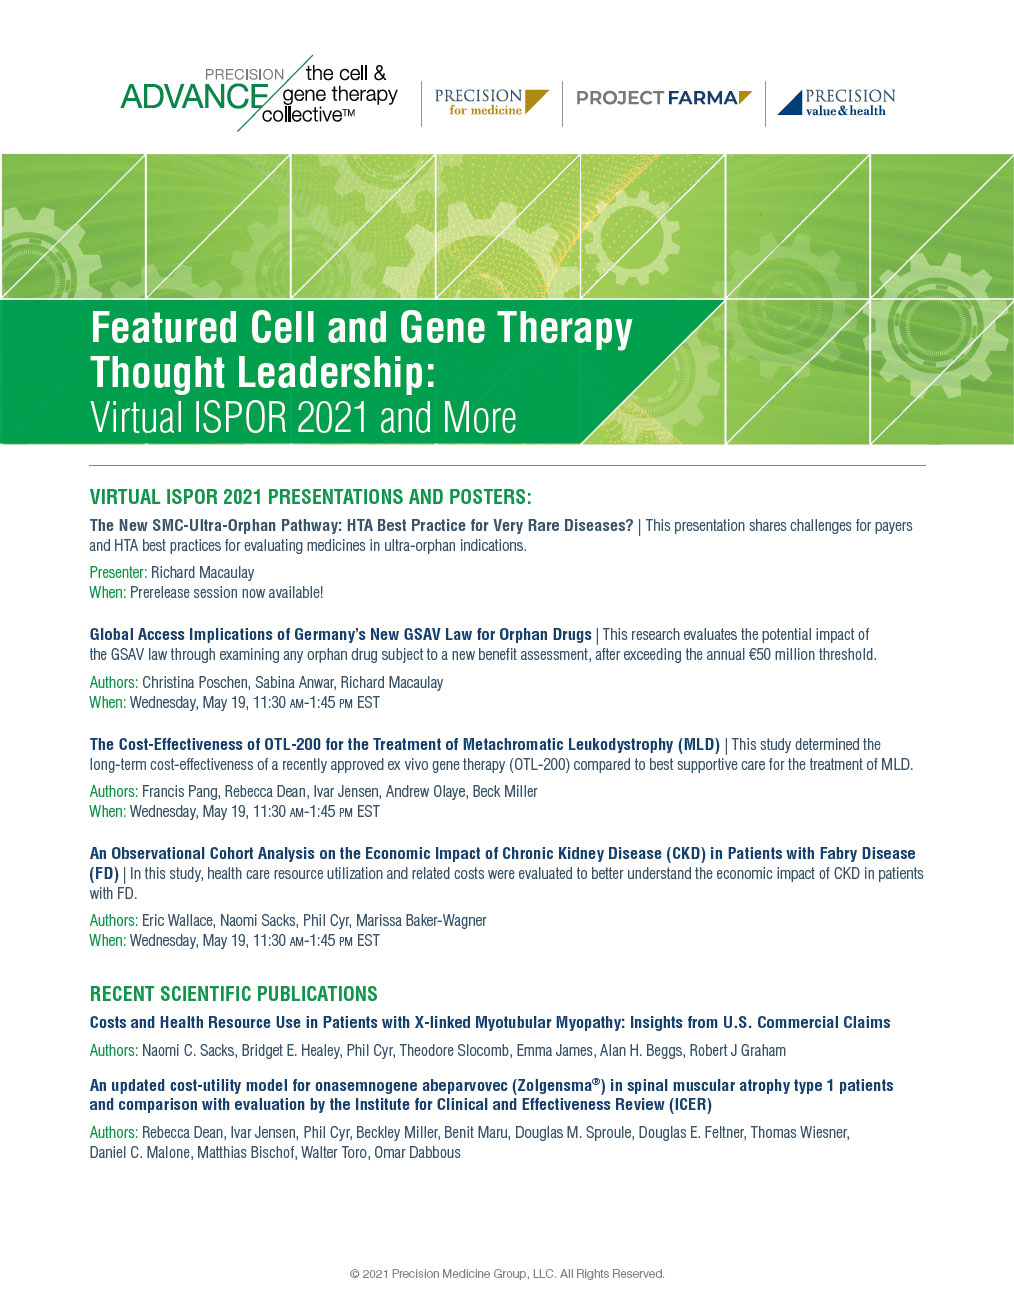 The Future of Reimbursement for Cell & Gene Therapies brief thumbnail